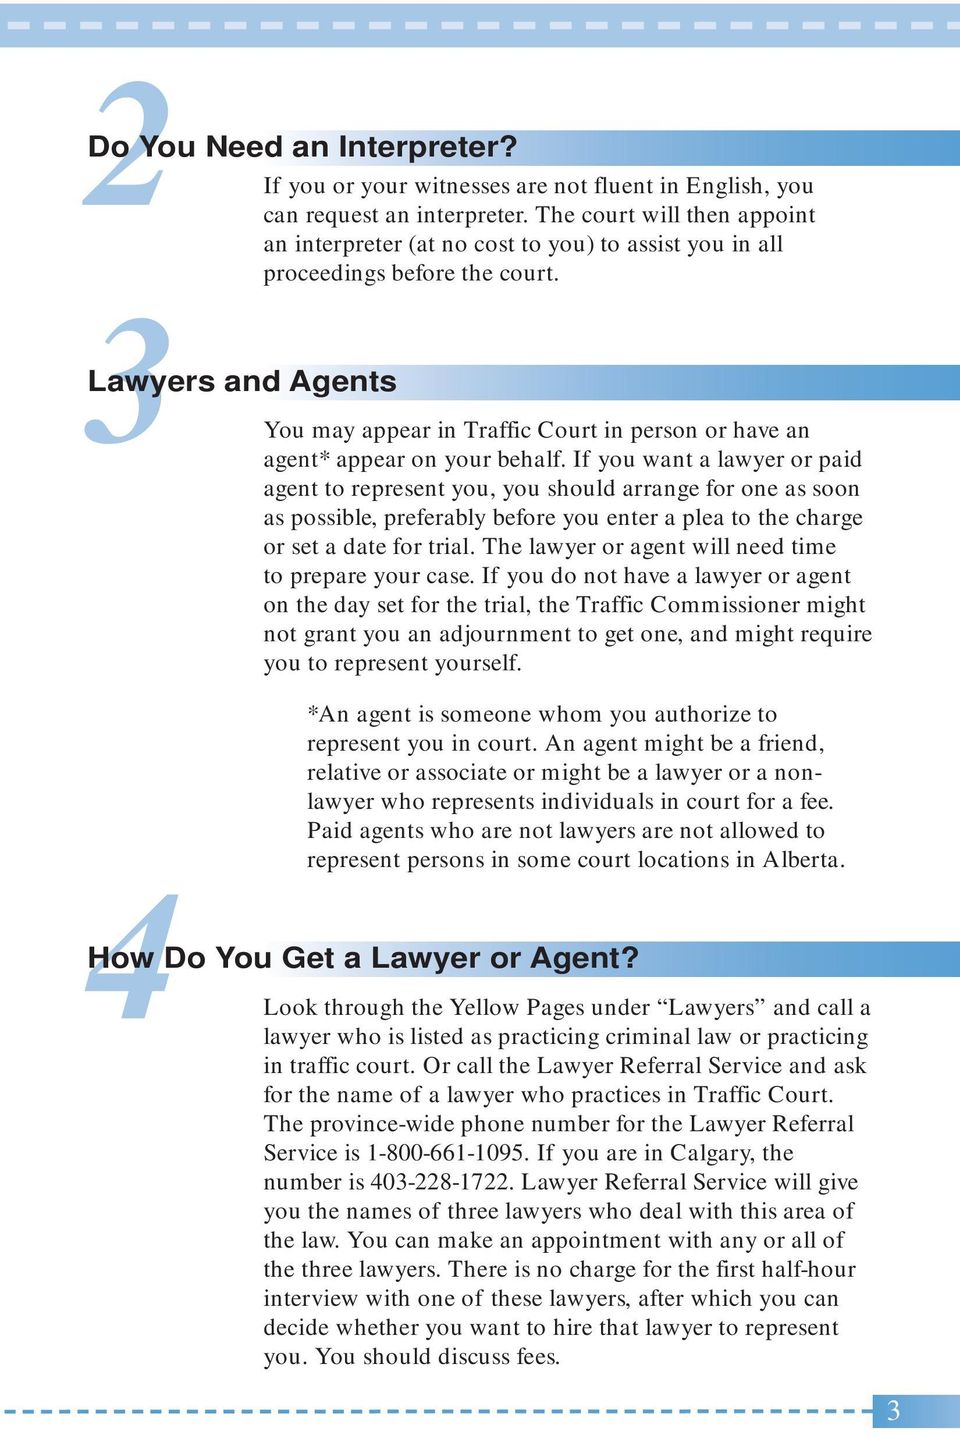 3Lawyers and Agents You may appear in Traffic Court in person or have an agent* appear on your behalf.